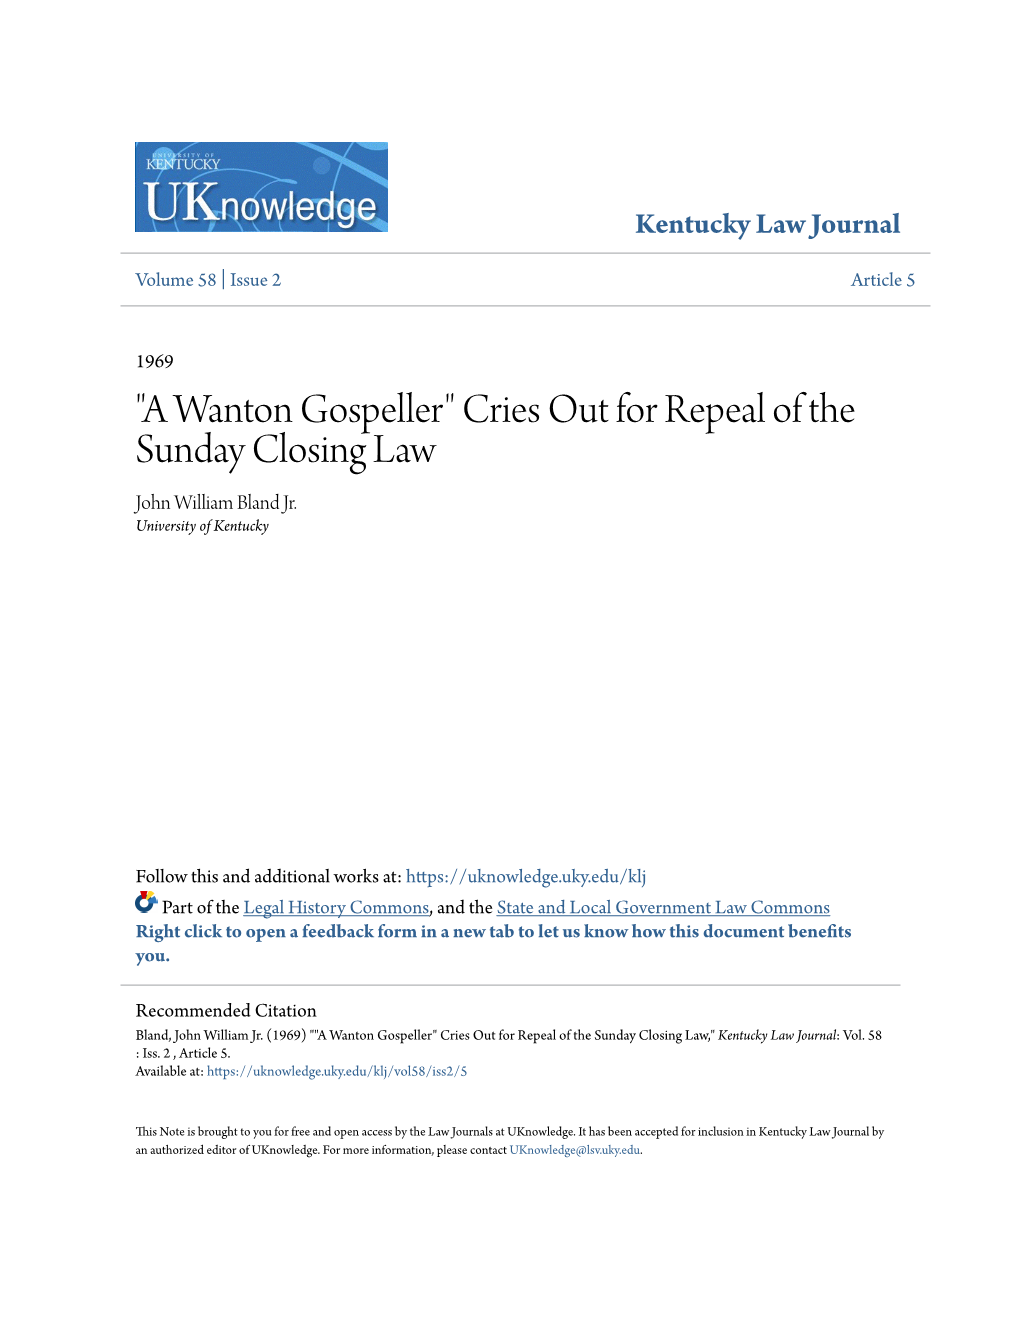 A Wanton Gospeller" Cries out for Repeal of the Sunday Closing Law John William Bland Jr